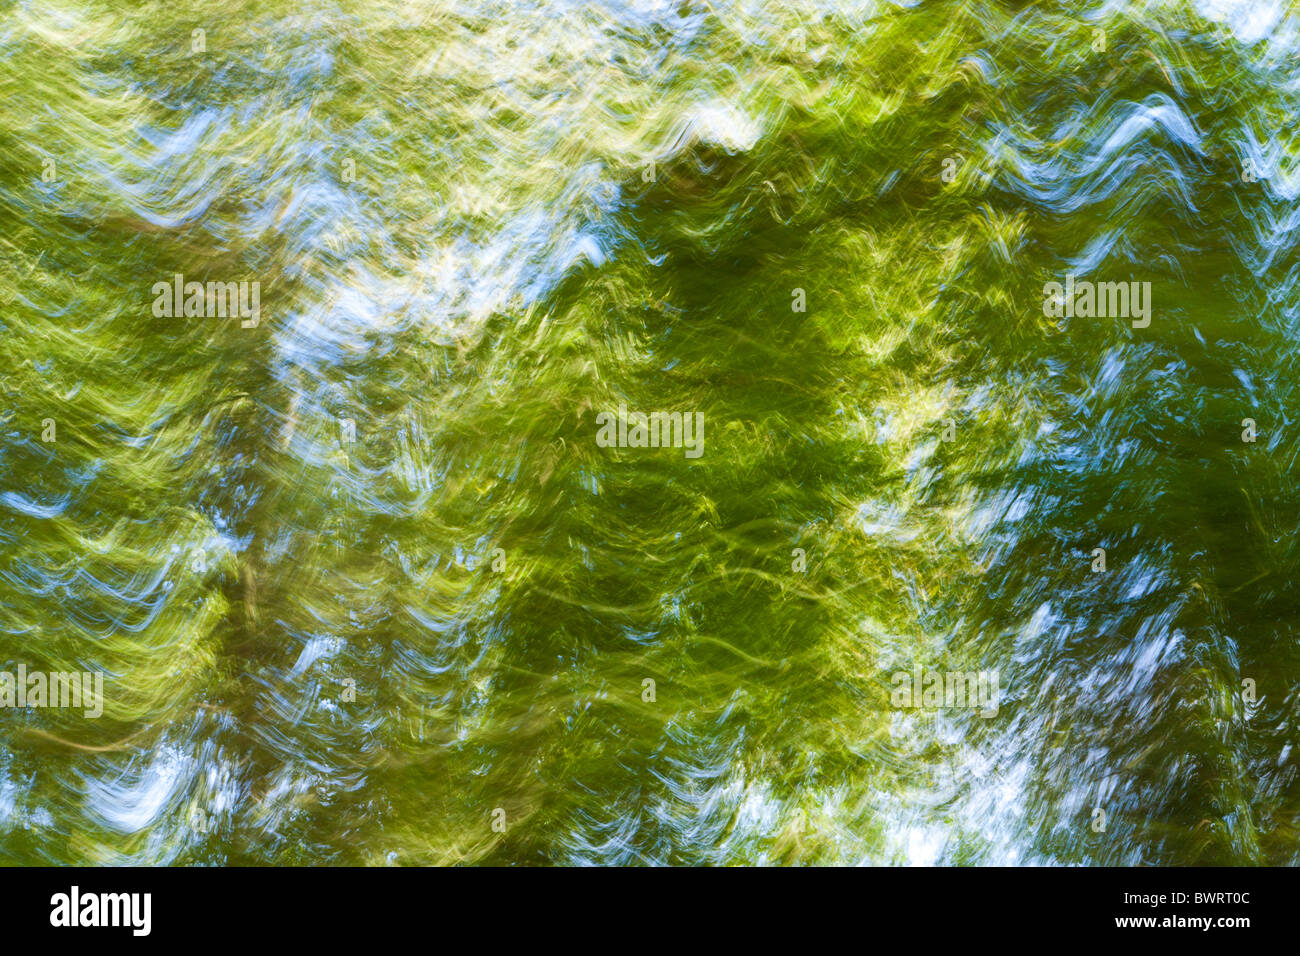 A glance out of the car window at speed in the countryside Stock Photo